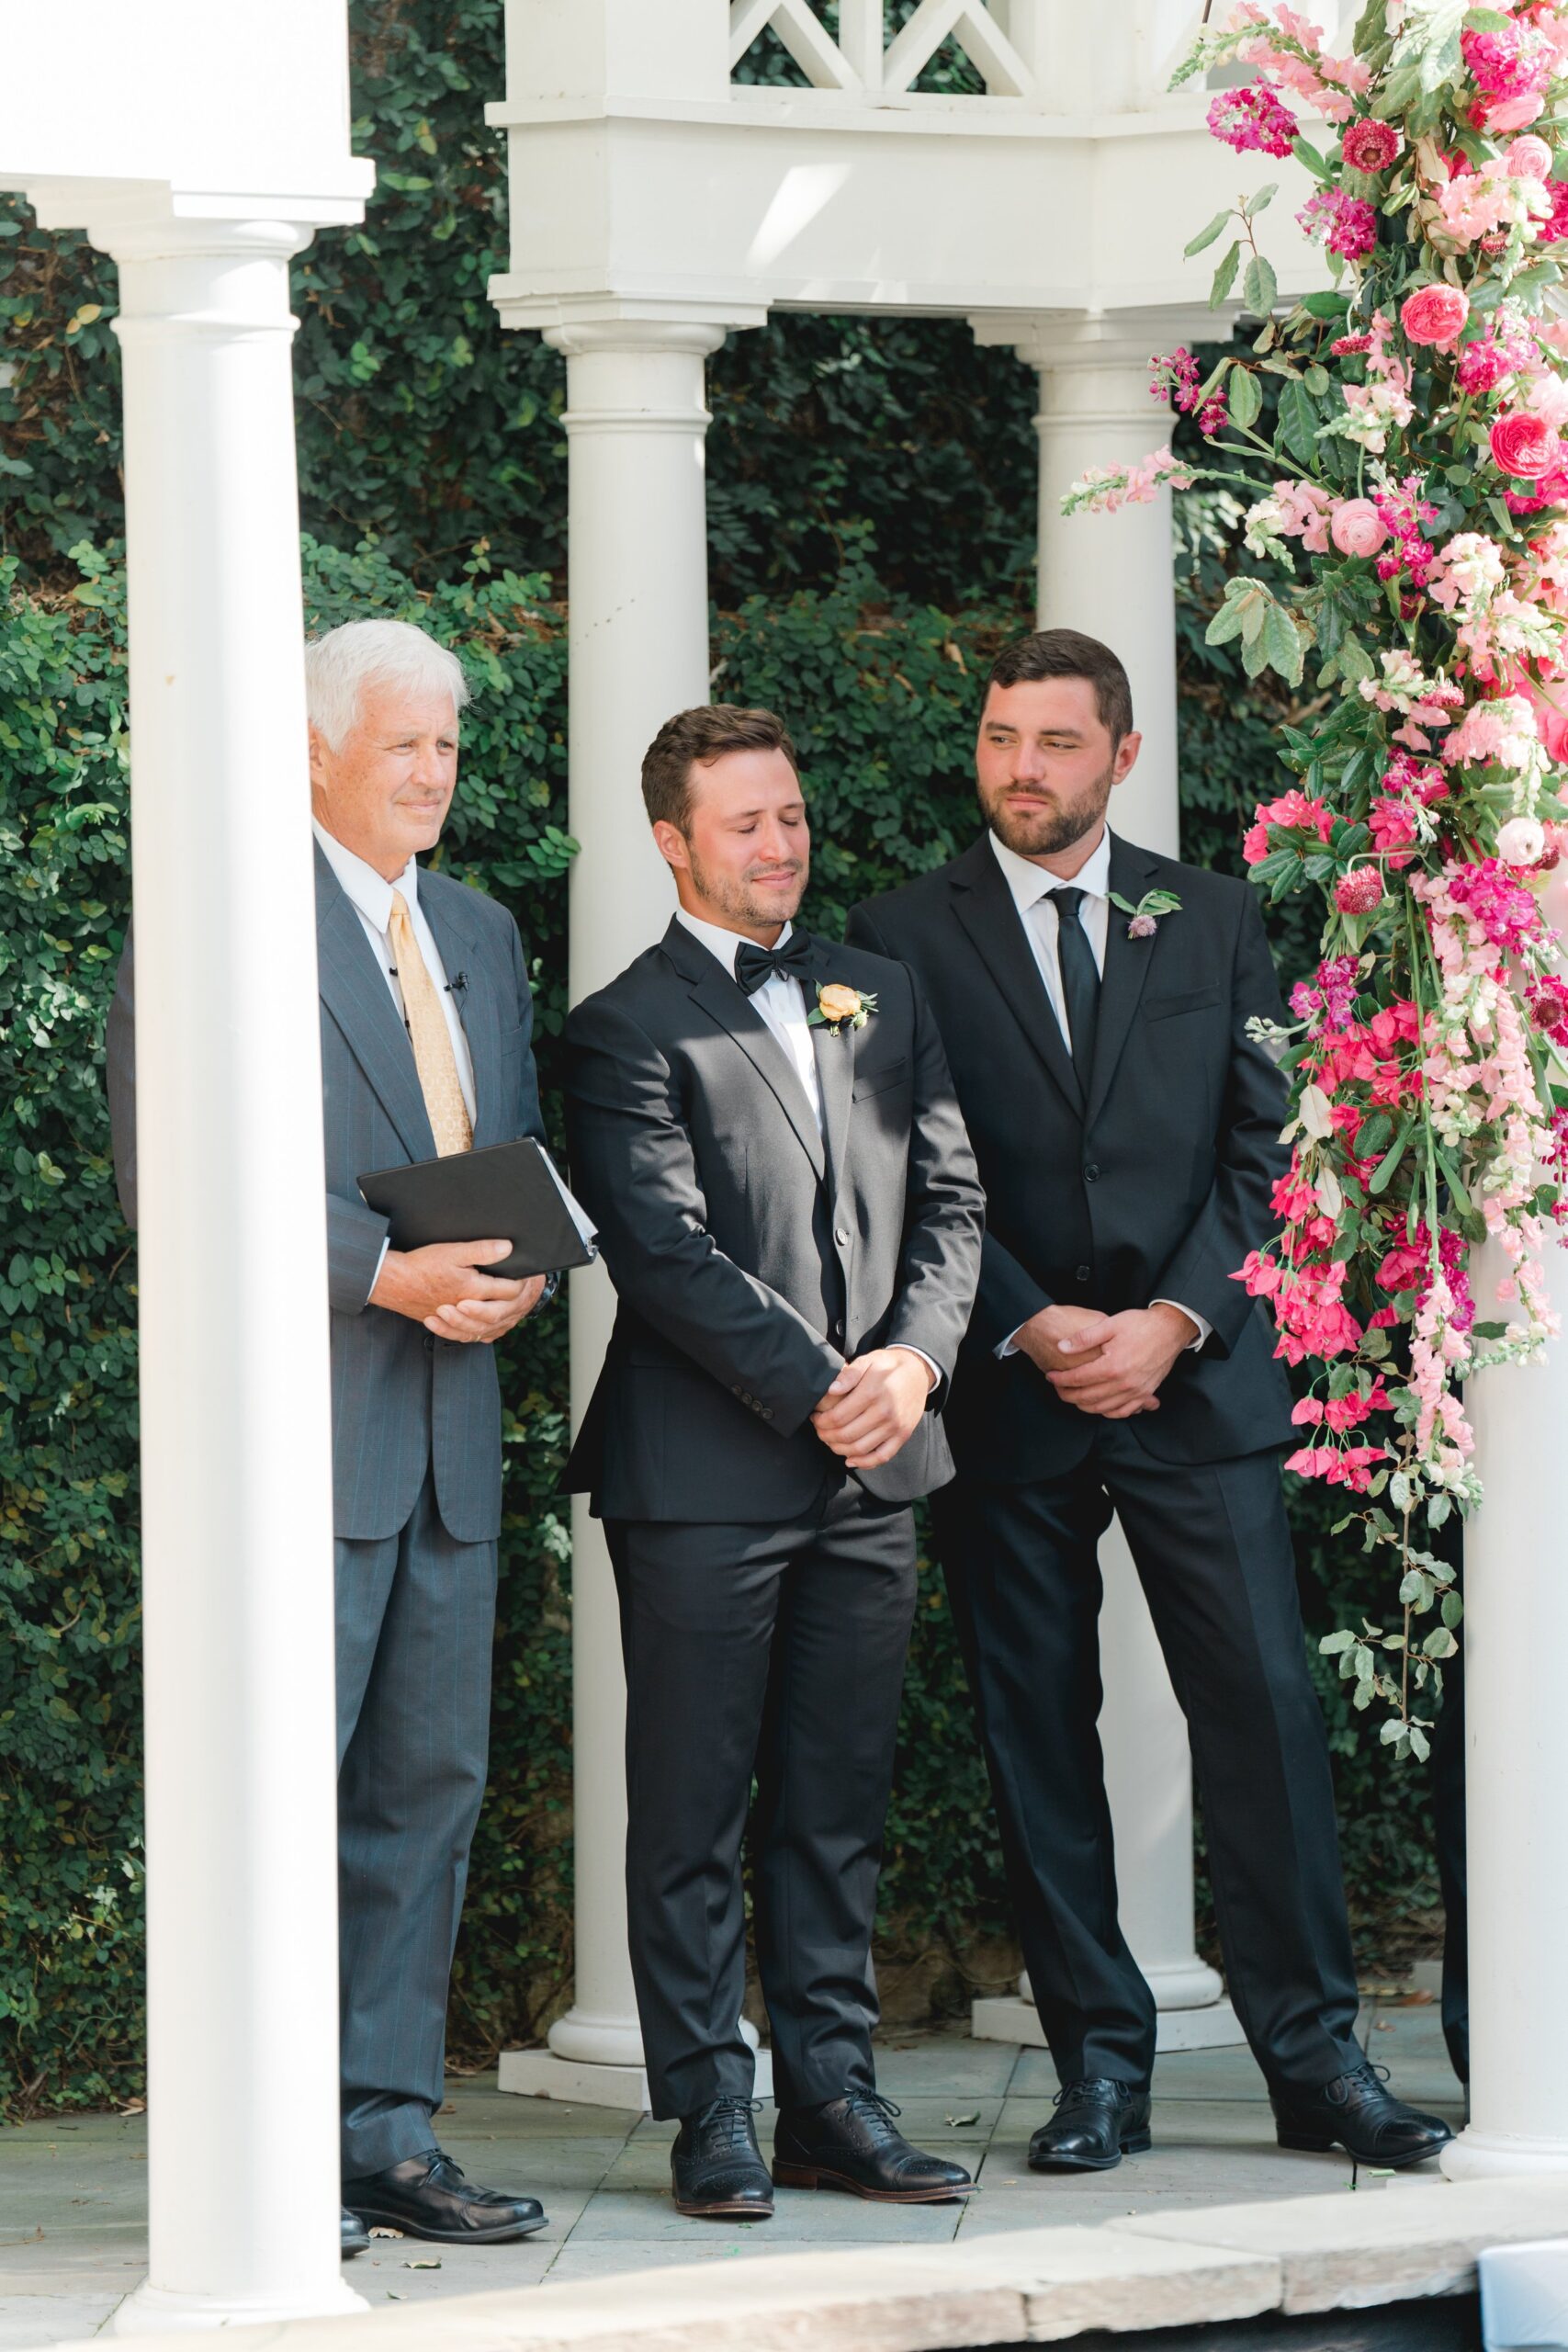 emotional groom with best man support at spring charleston wedding ceremony.